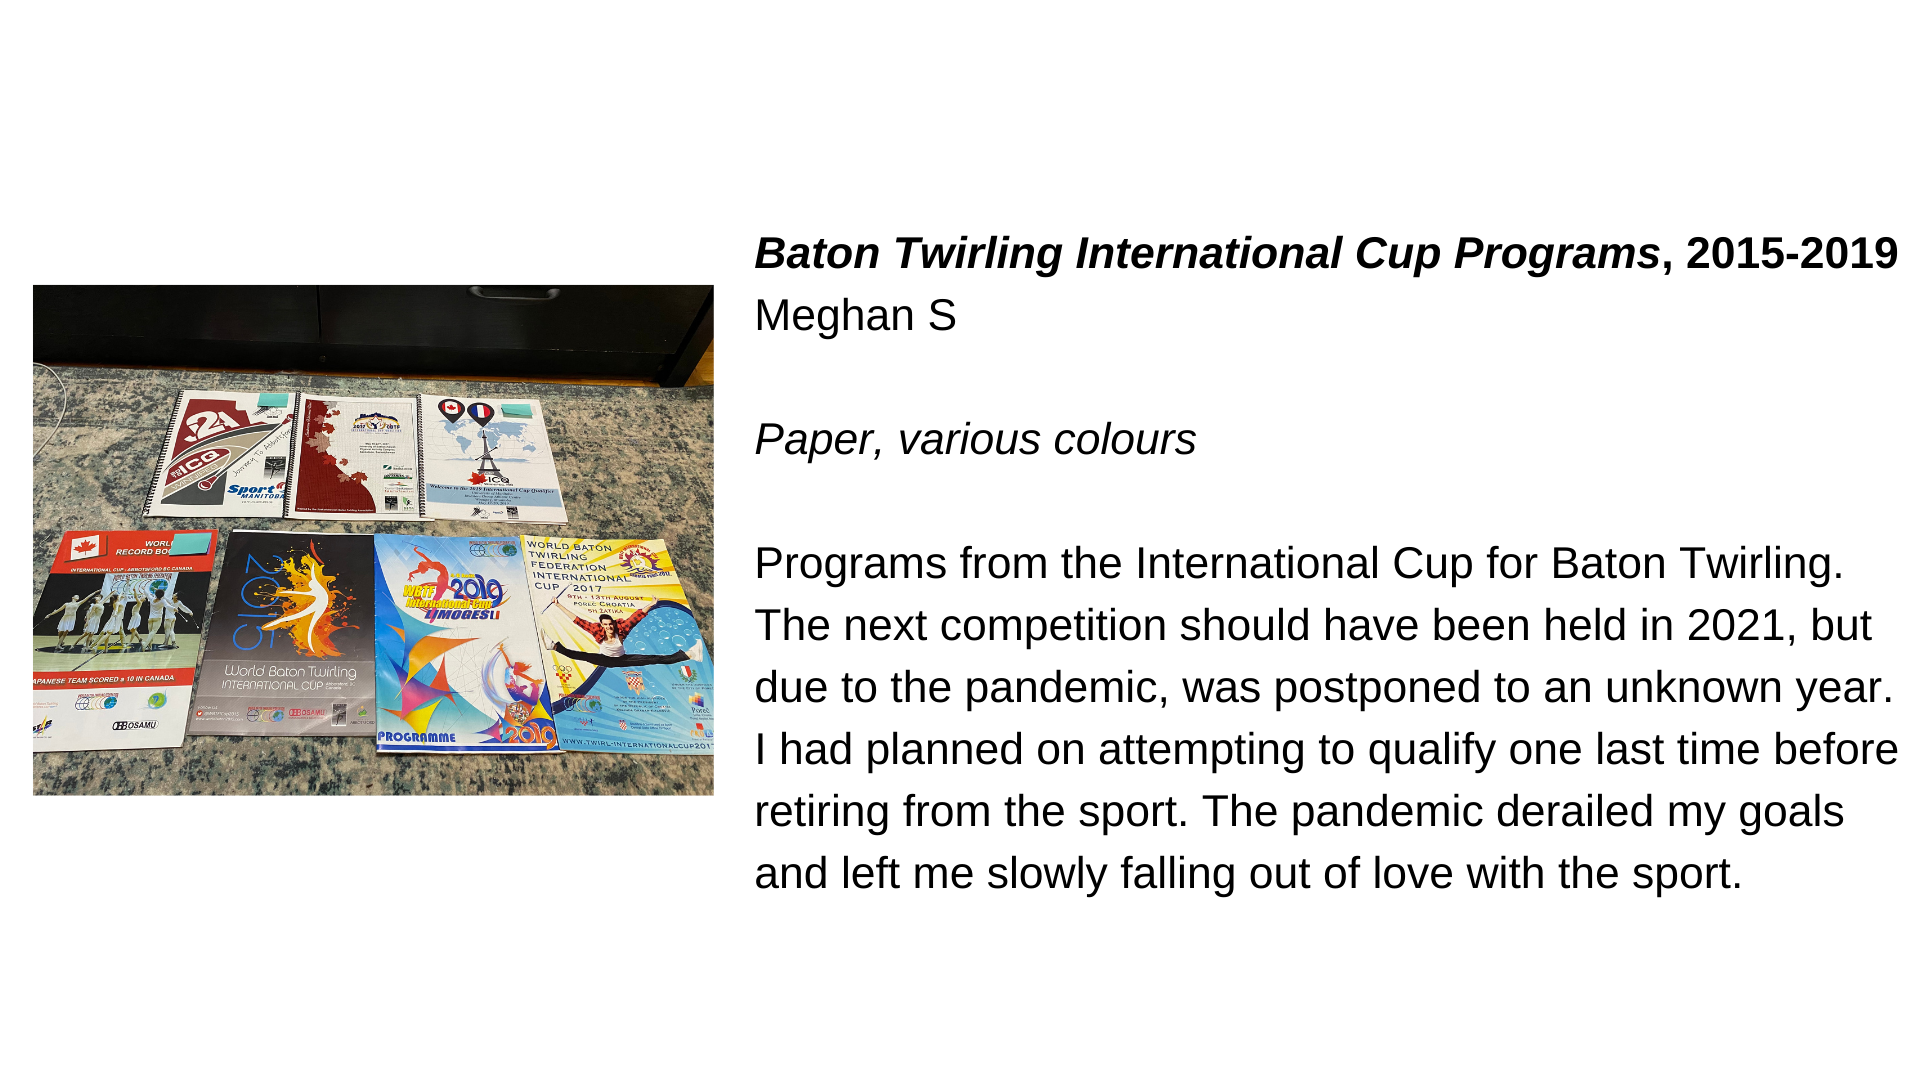  7 programs about baton twirling. Next to this image, the text, “Baton Twirling International Cup Programs, 2015-2019 - Meghan S. Paper, various colours. Programs from the International Cup for Baton Twirling. The next competition should have been he